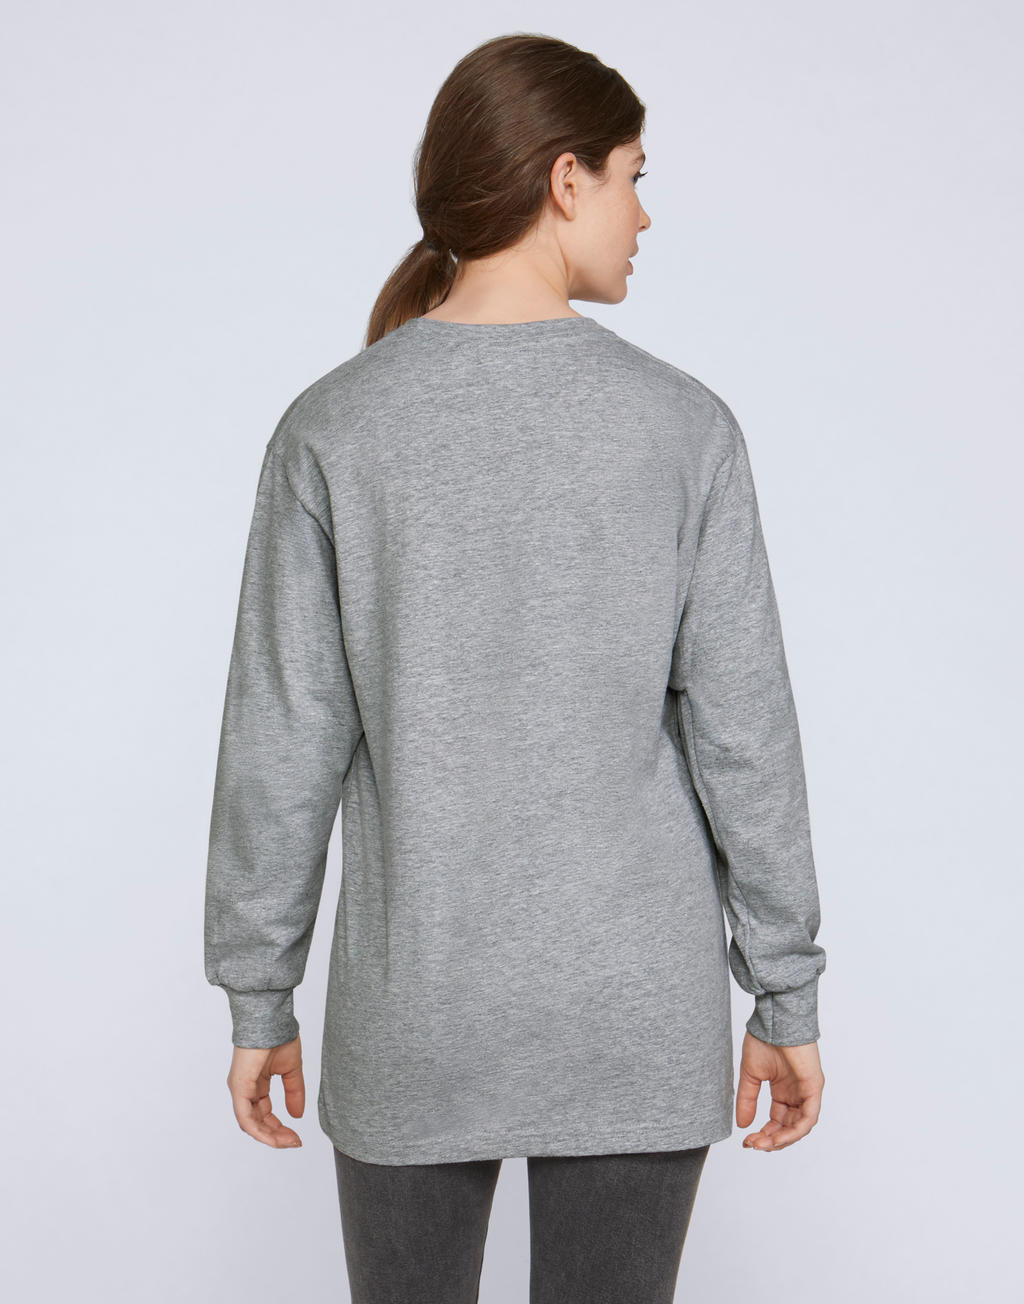  Hammer? Adult Long Sleeve T-Shirt in Farbe White